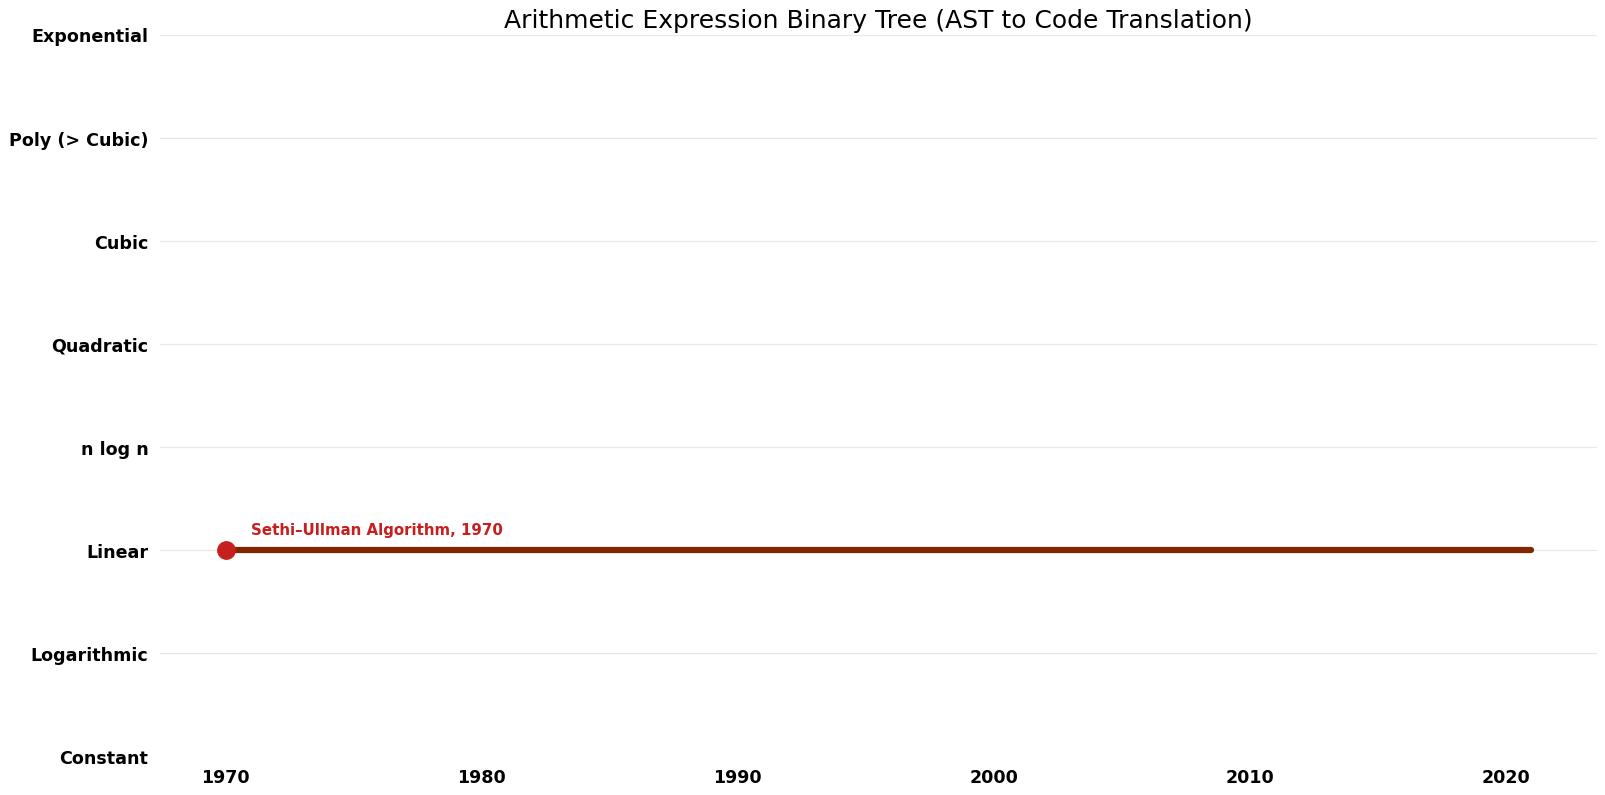 AST to Code Translation - Arithmetic Expression Binary Tree - Time.png